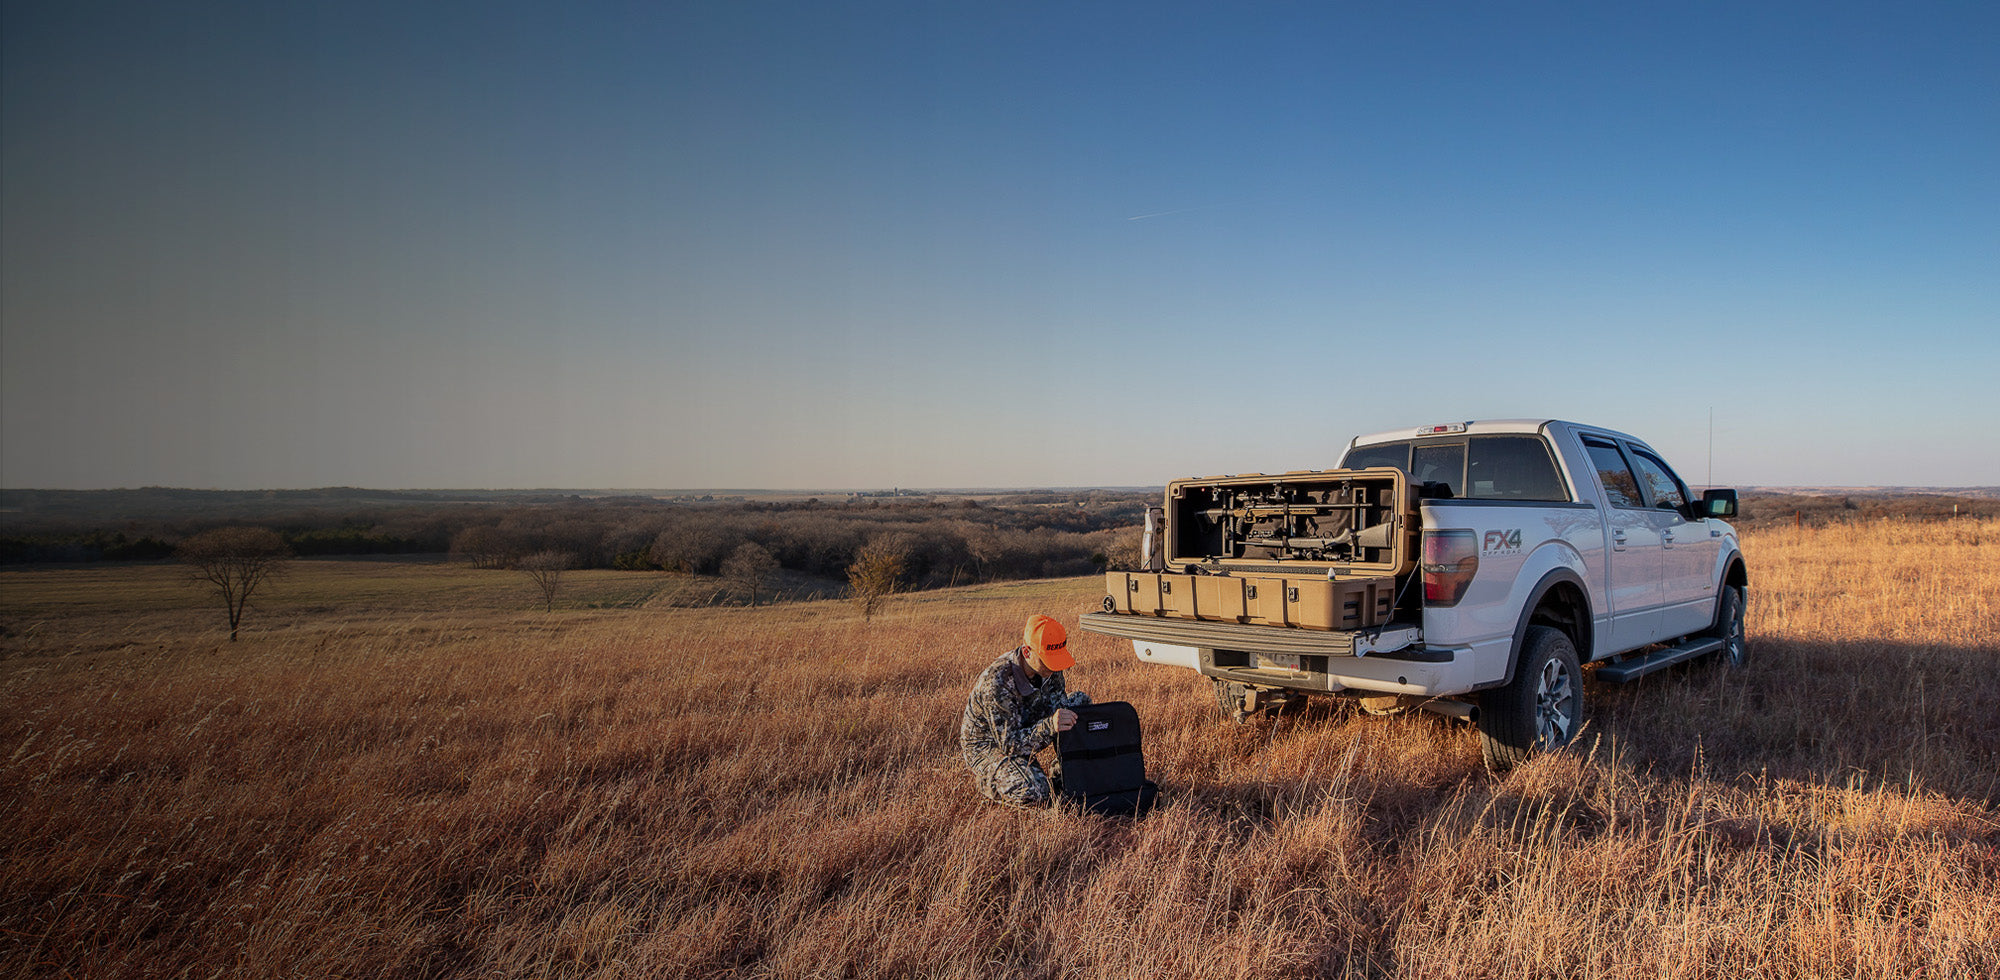 Bronc 52 on Truck Bed in a Grassy Field Outdoors Before Going Out on a Hunt